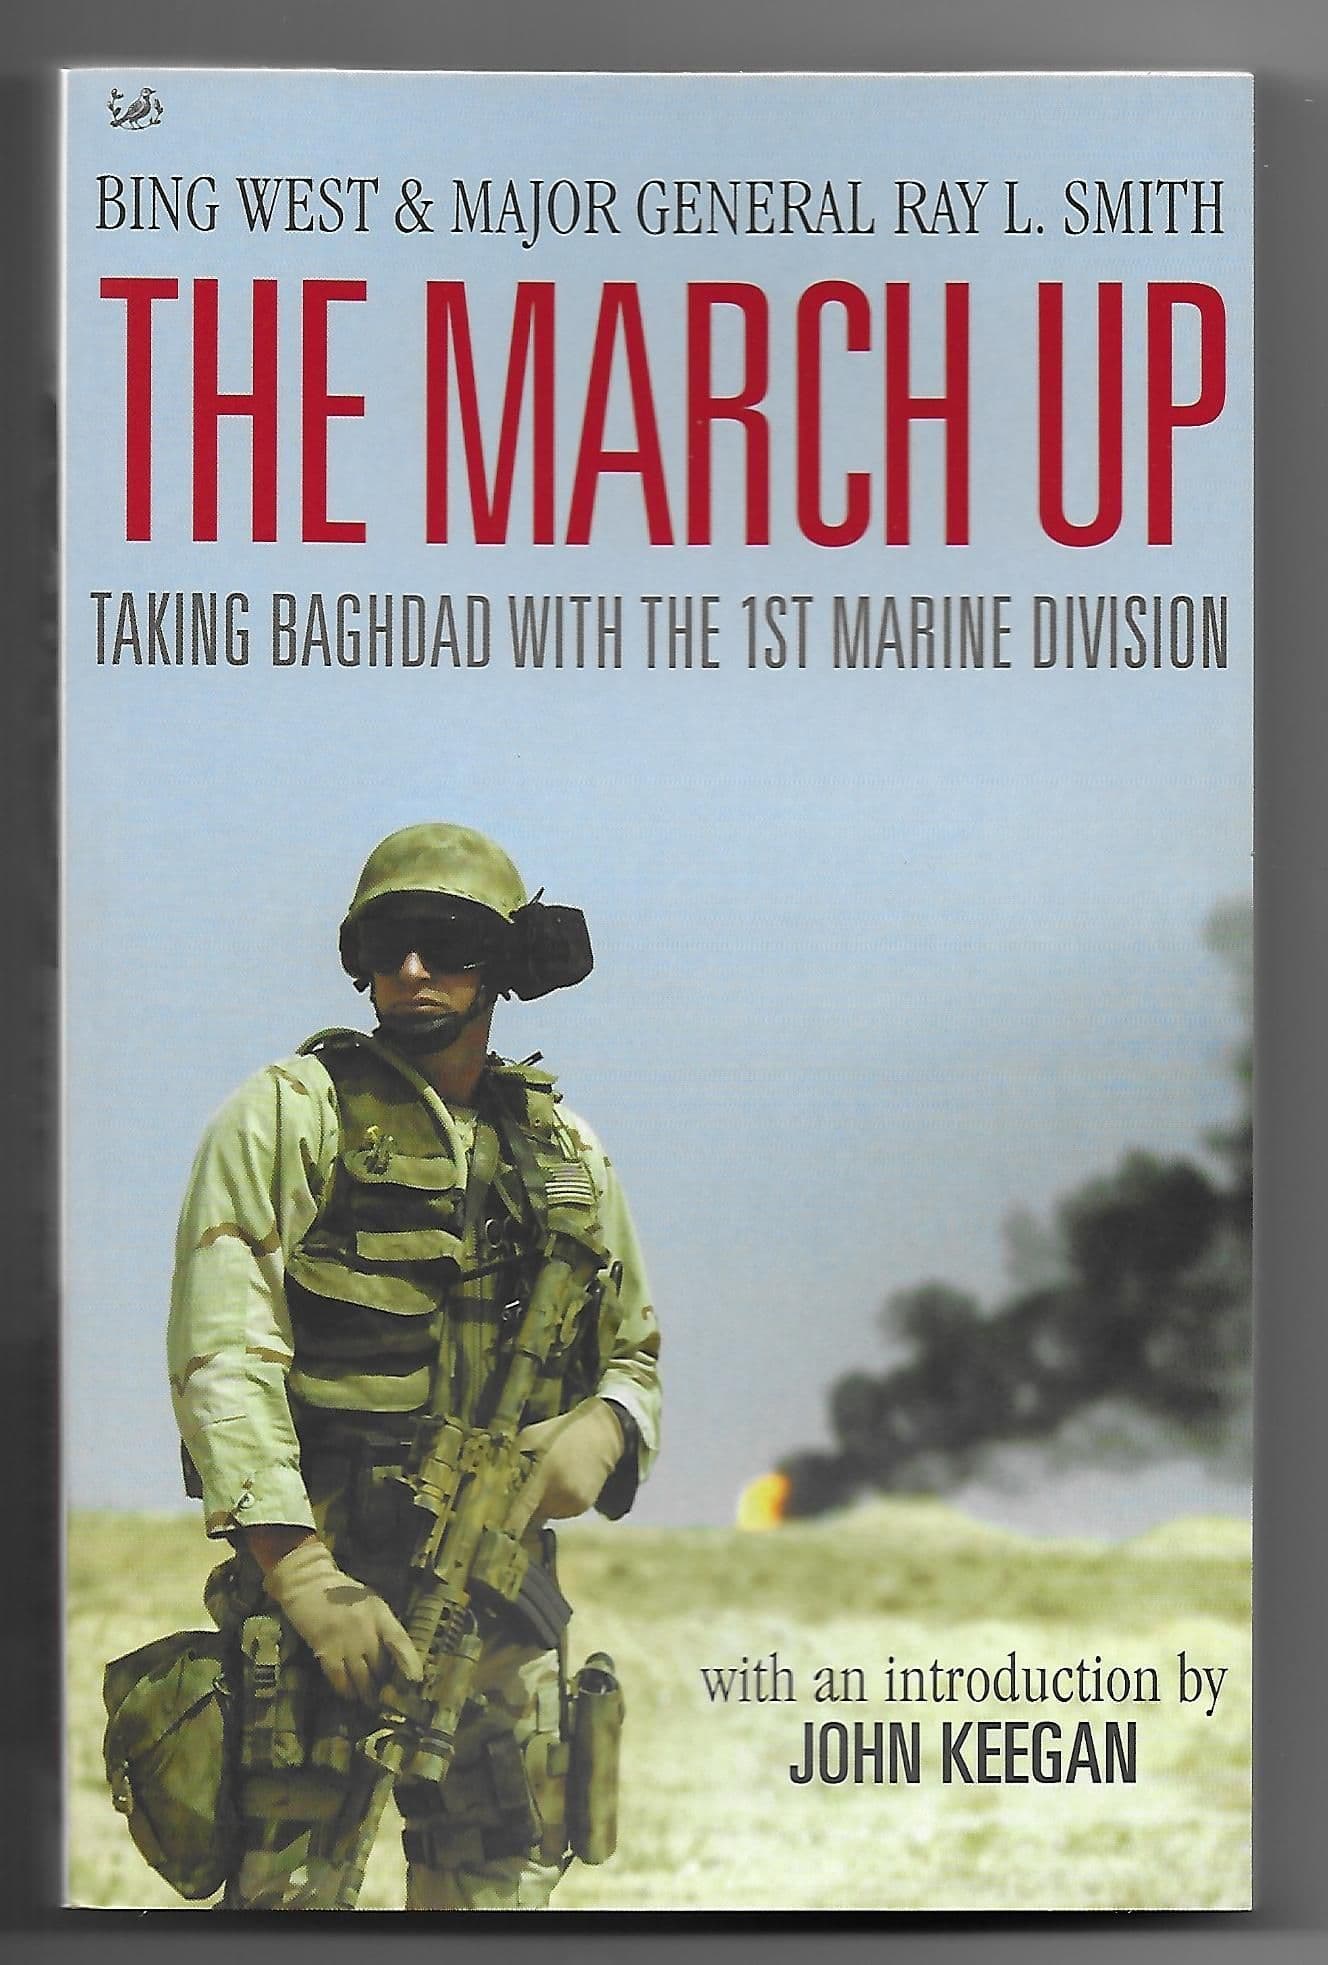 The March Up, Taking Baghdad with the 1st Marine Division